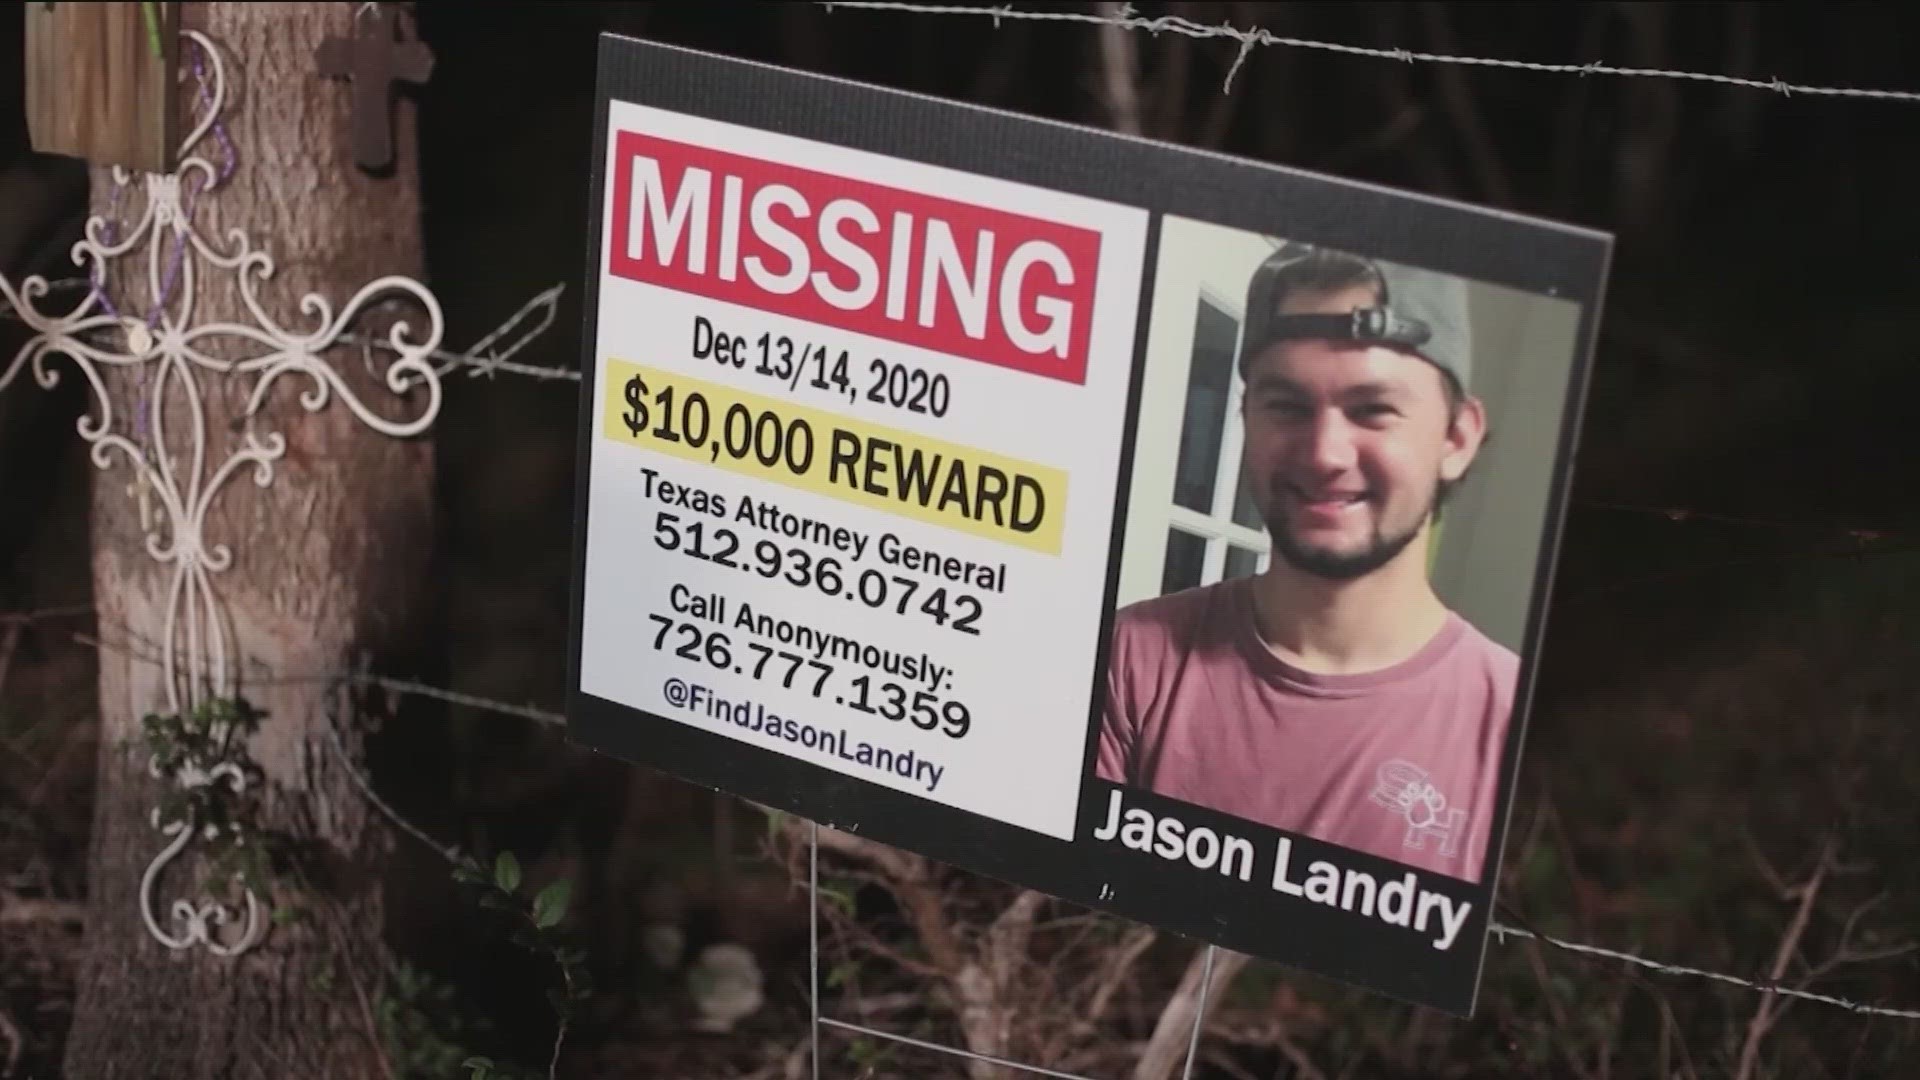 Family and friends of Jason Landry came together Friday to pray for answers after his disappearance in December 2020.